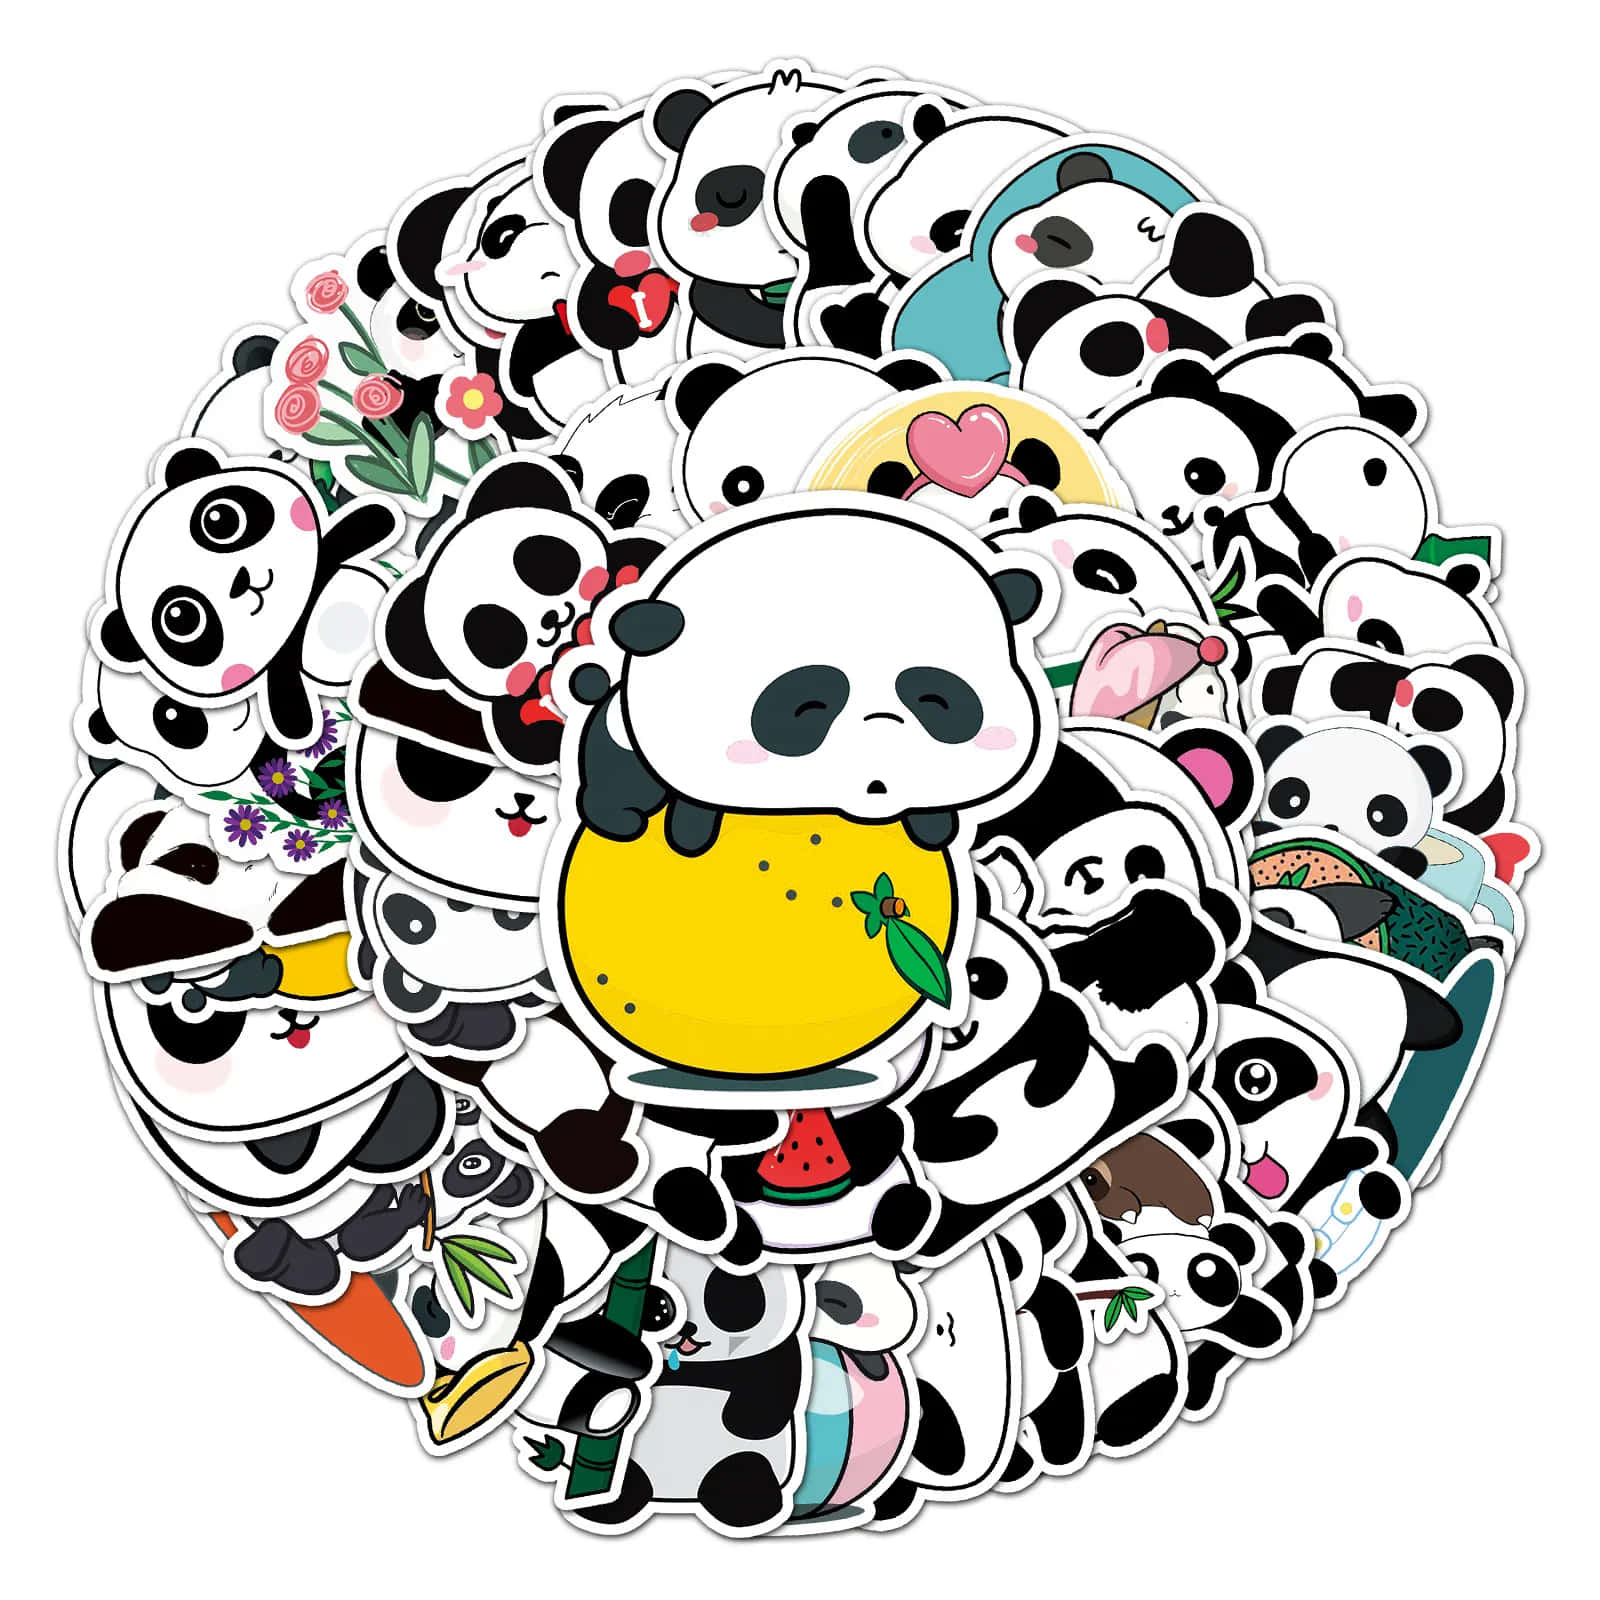 A Circle Of Panda Stickers In A Circle